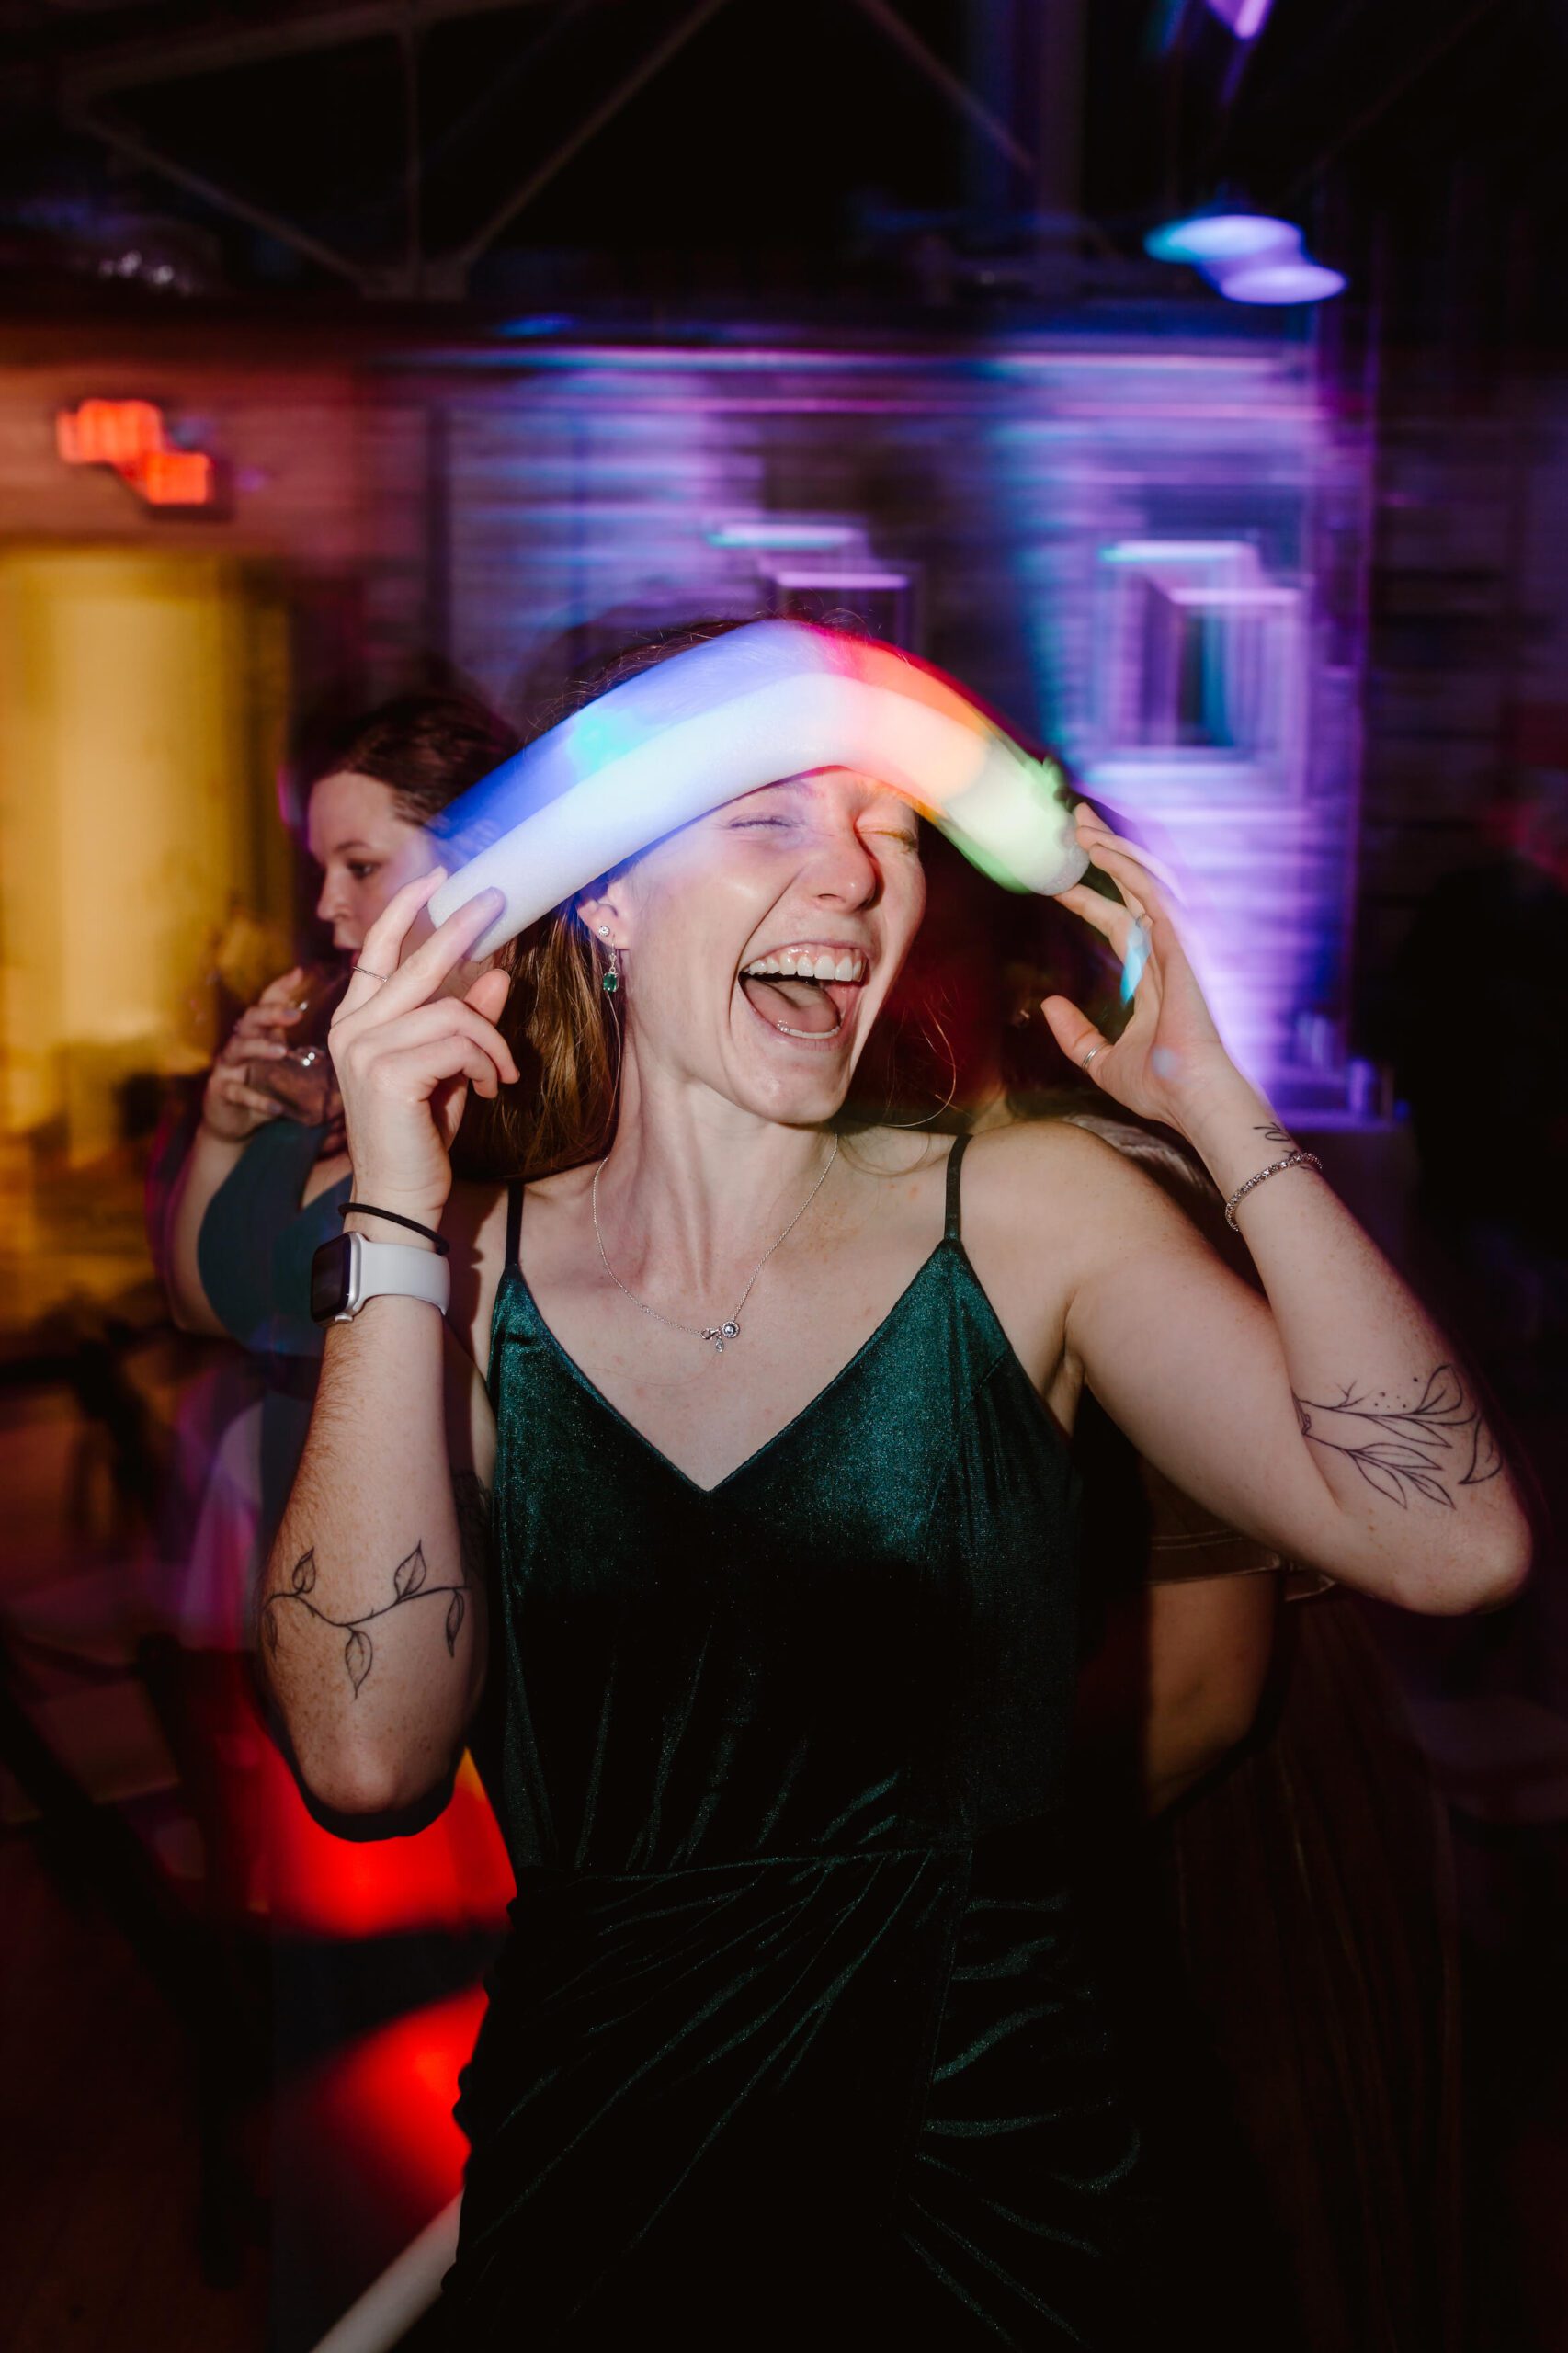 girl laughing while holding glow stick over her forehead